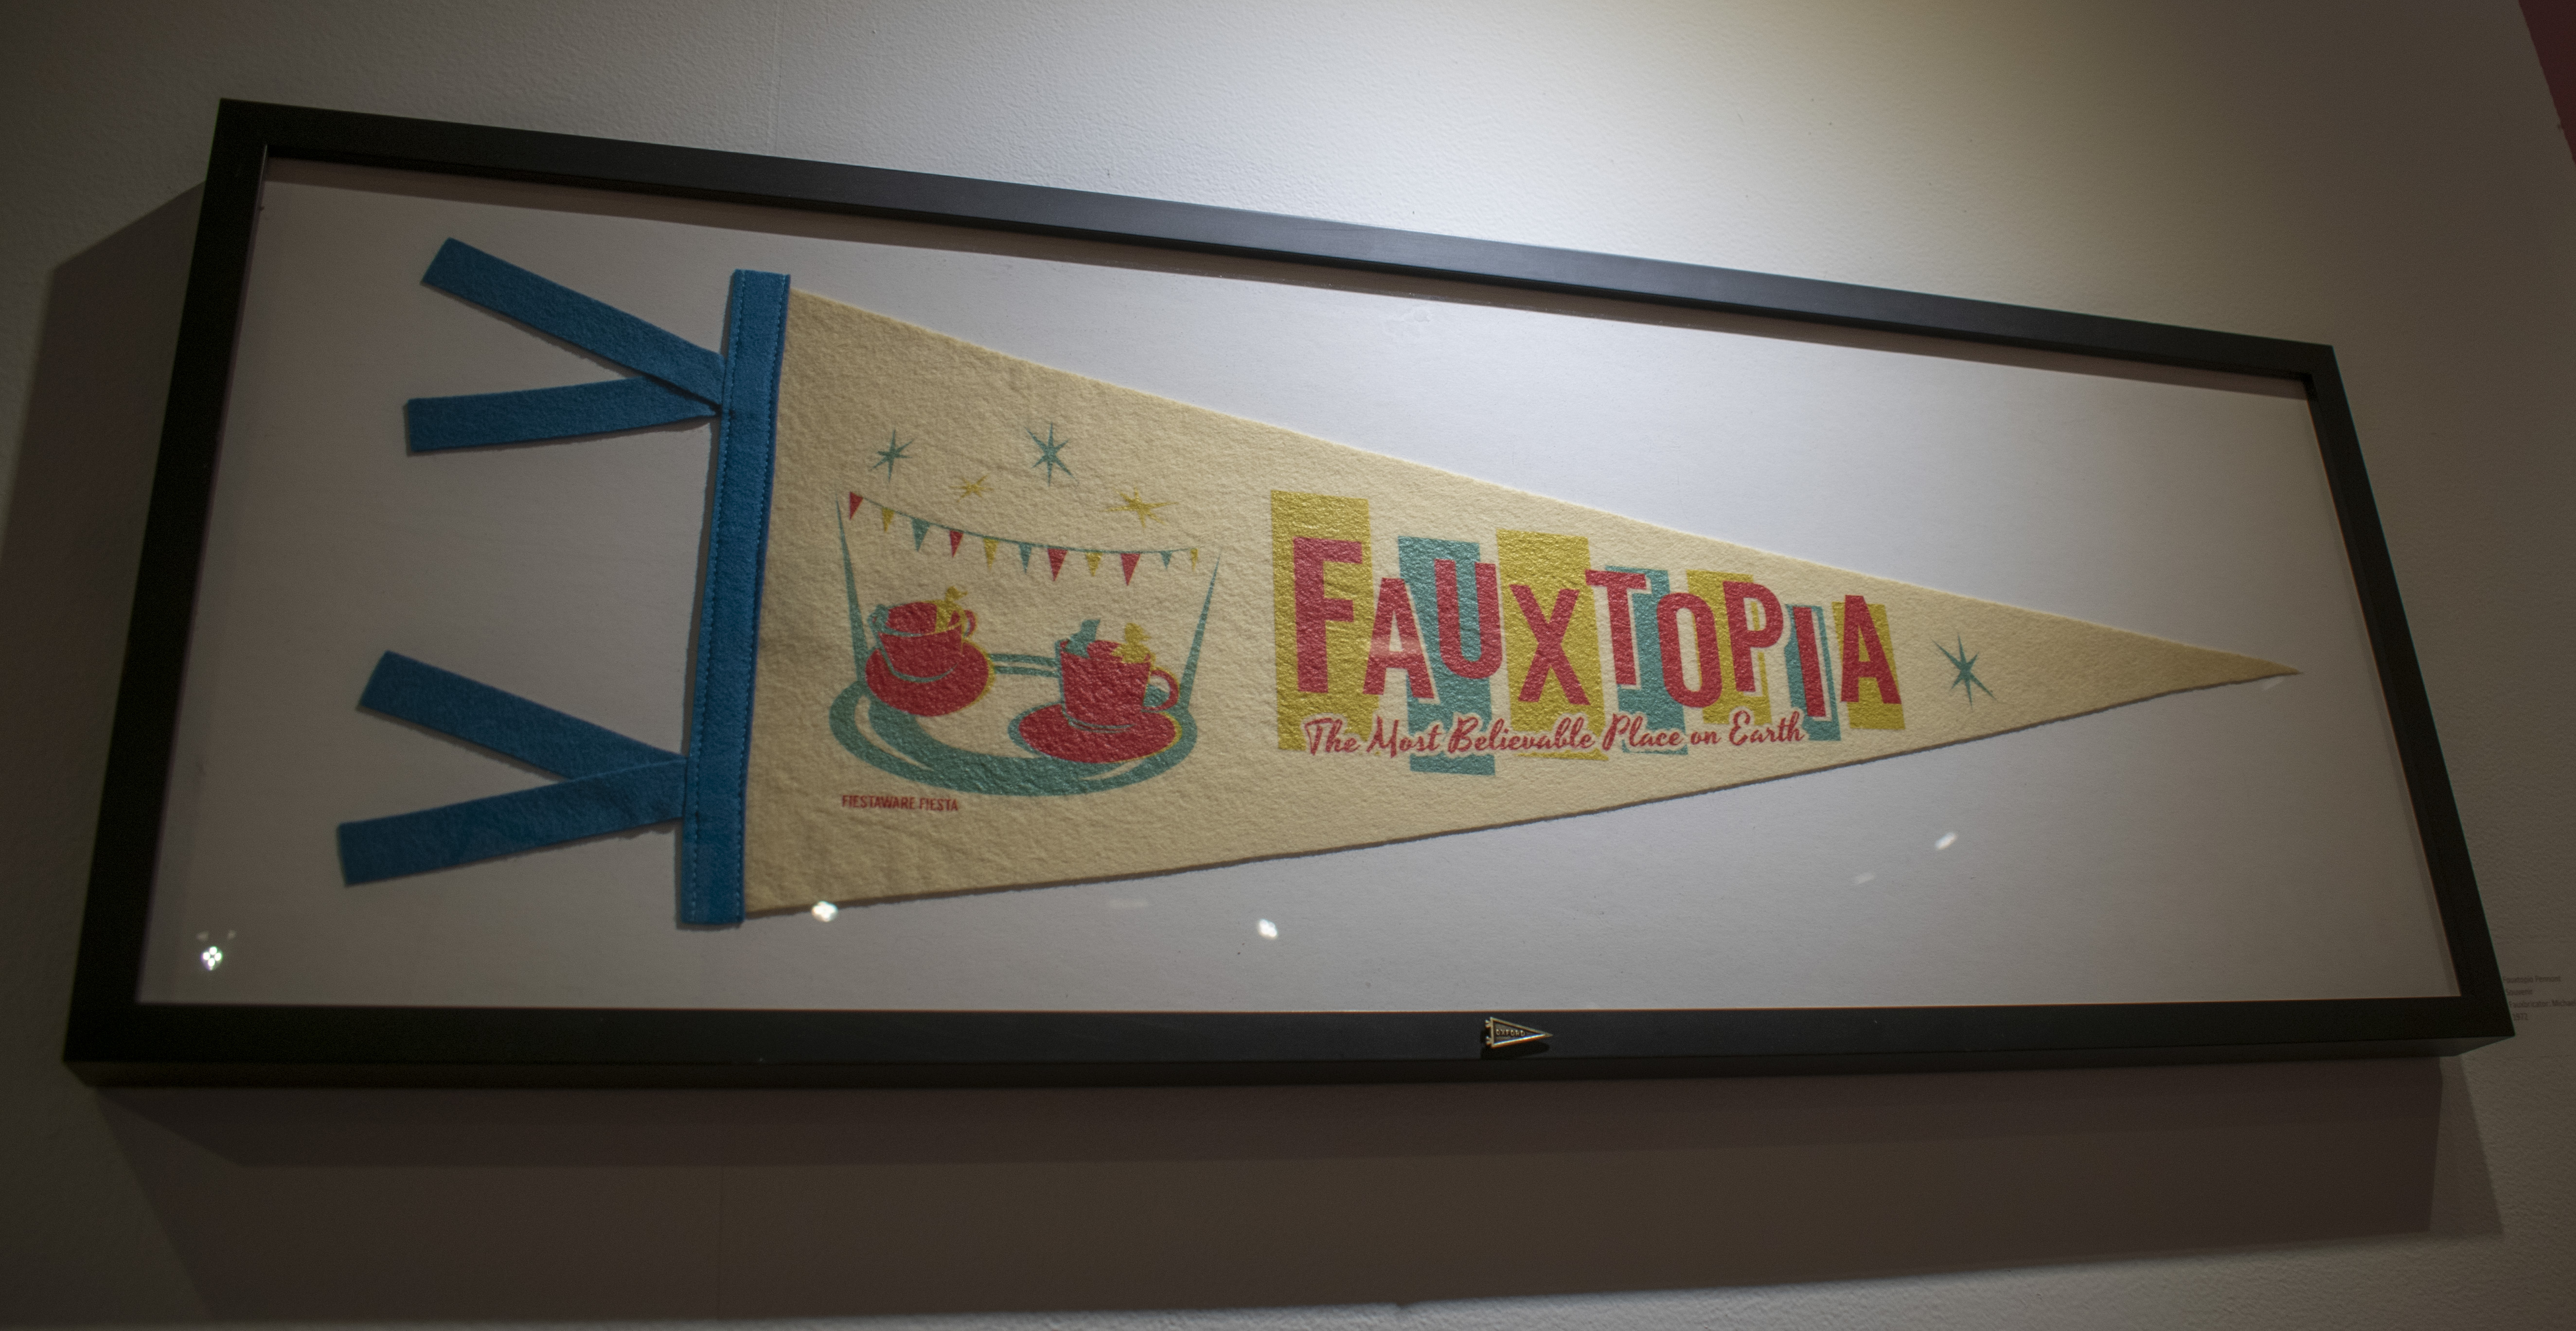 Multi Colored Pennant with teacup amusement ride with Fauxtopia title "Fauxtopia The Most Beautiful Place on Earth"